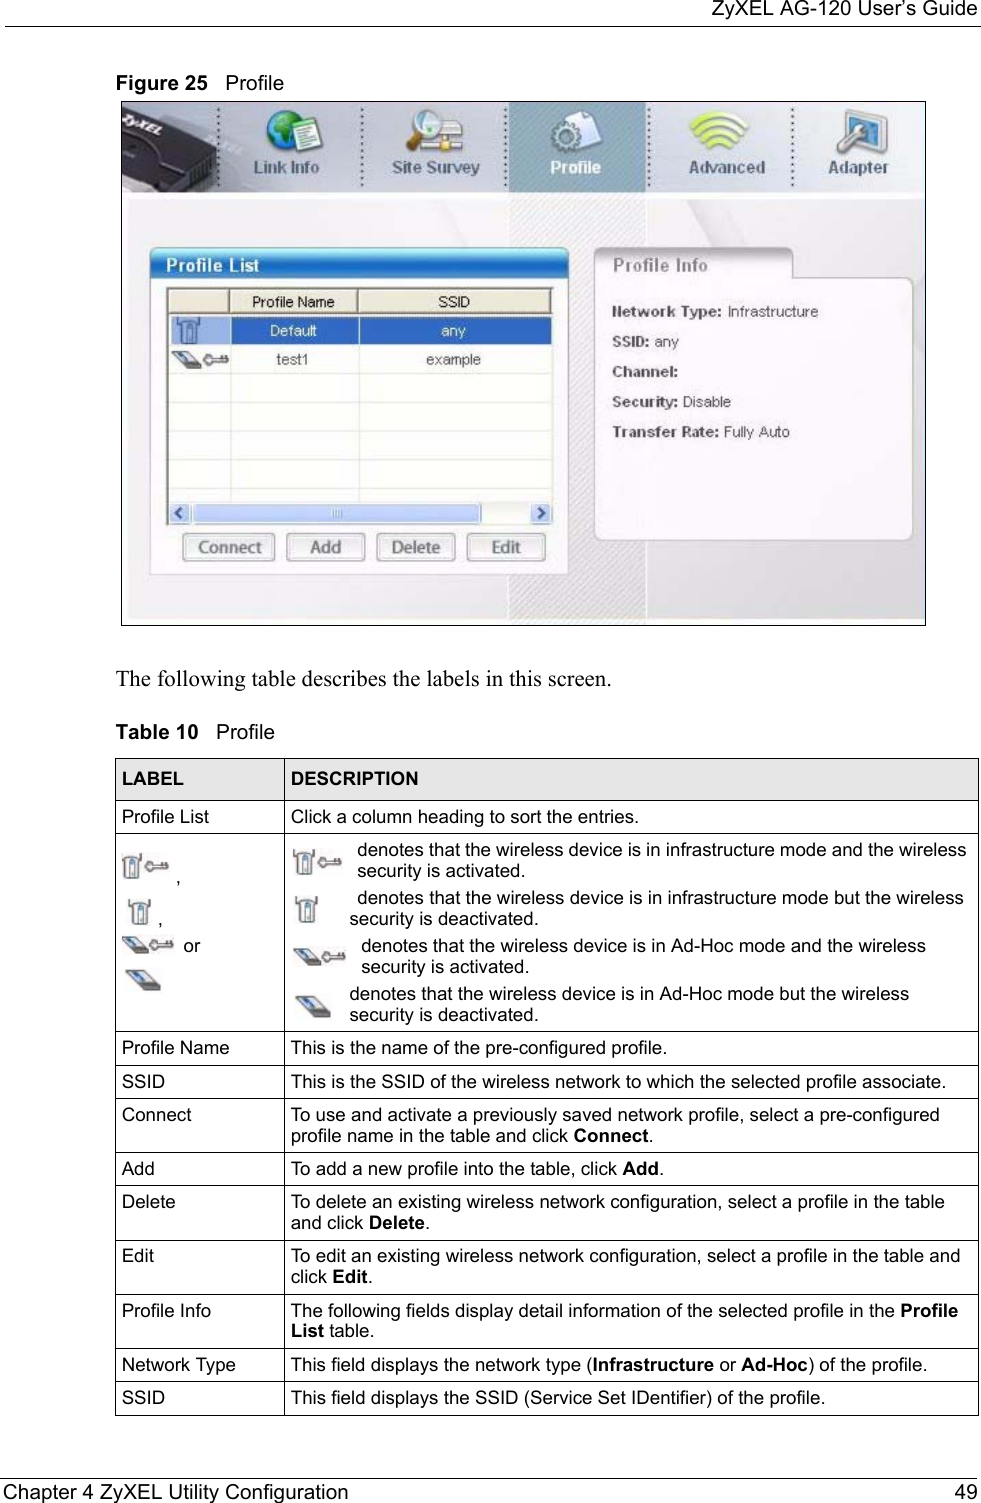 ZyXEL AG-120 User’s GuideChapter 4 ZyXEL Utility Configuration 49Figure 25   Profile  The following table describes the labels in this screen. Table 10   Profile LABEL DESCRIPTIONProfile List Click a column heading to sort the entries.,, ordenotes that the wireless device is in infrastructure mode and the wireless security is activated.denotes that the wireless device is in infrastructure mode but the wireless security is deactivated.denotes that the wireless device is in Ad-Hoc mode and the wireless security is activated.denotes that the wireless device is in Ad-Hoc mode but the wireless security is deactivated.Profile Name This is the name of the pre-configured profile.SSID This is the SSID of the wireless network to which the selected profile associate.Connect  To use and activate a previously saved network profile, select a pre-configured profile name in the table and click Connect.Add  To add a new profile into the table, click Add.Delete To delete an existing wireless network configuration, select a profile in the table and click Delete.Edit To edit an existing wireless network configuration, select a profile in the table and click Edit.Profile Info The following fields display detail information of the selected profile in the Profile List table.Network Type This field displays the network type (Infrastructure or Ad-Hoc) of the profile.SSID This field displays the SSID (Service Set IDentifier) of the profile.